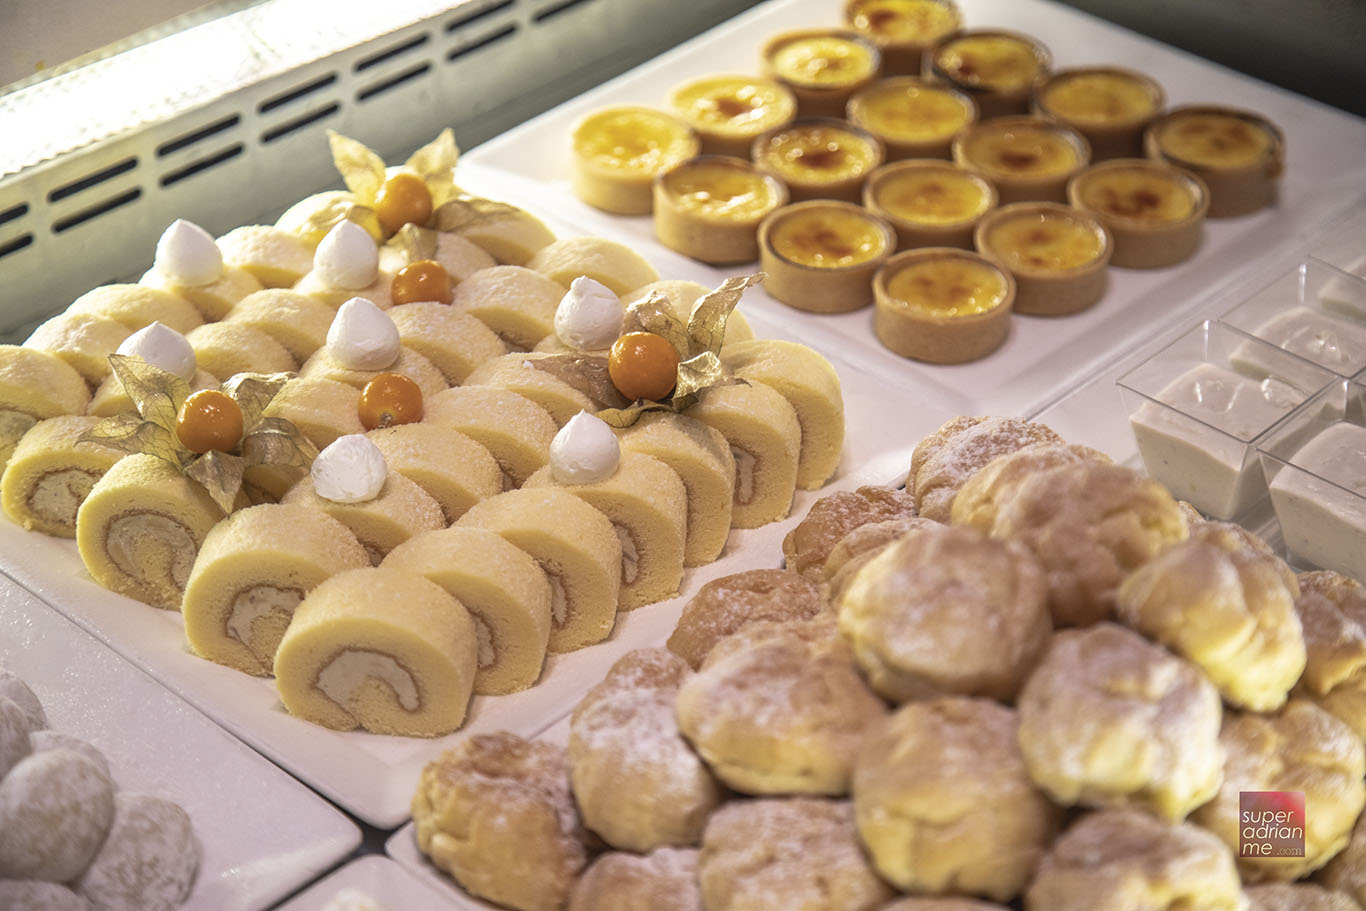 Durian cakes and pastries at Marriott Café in Singapore